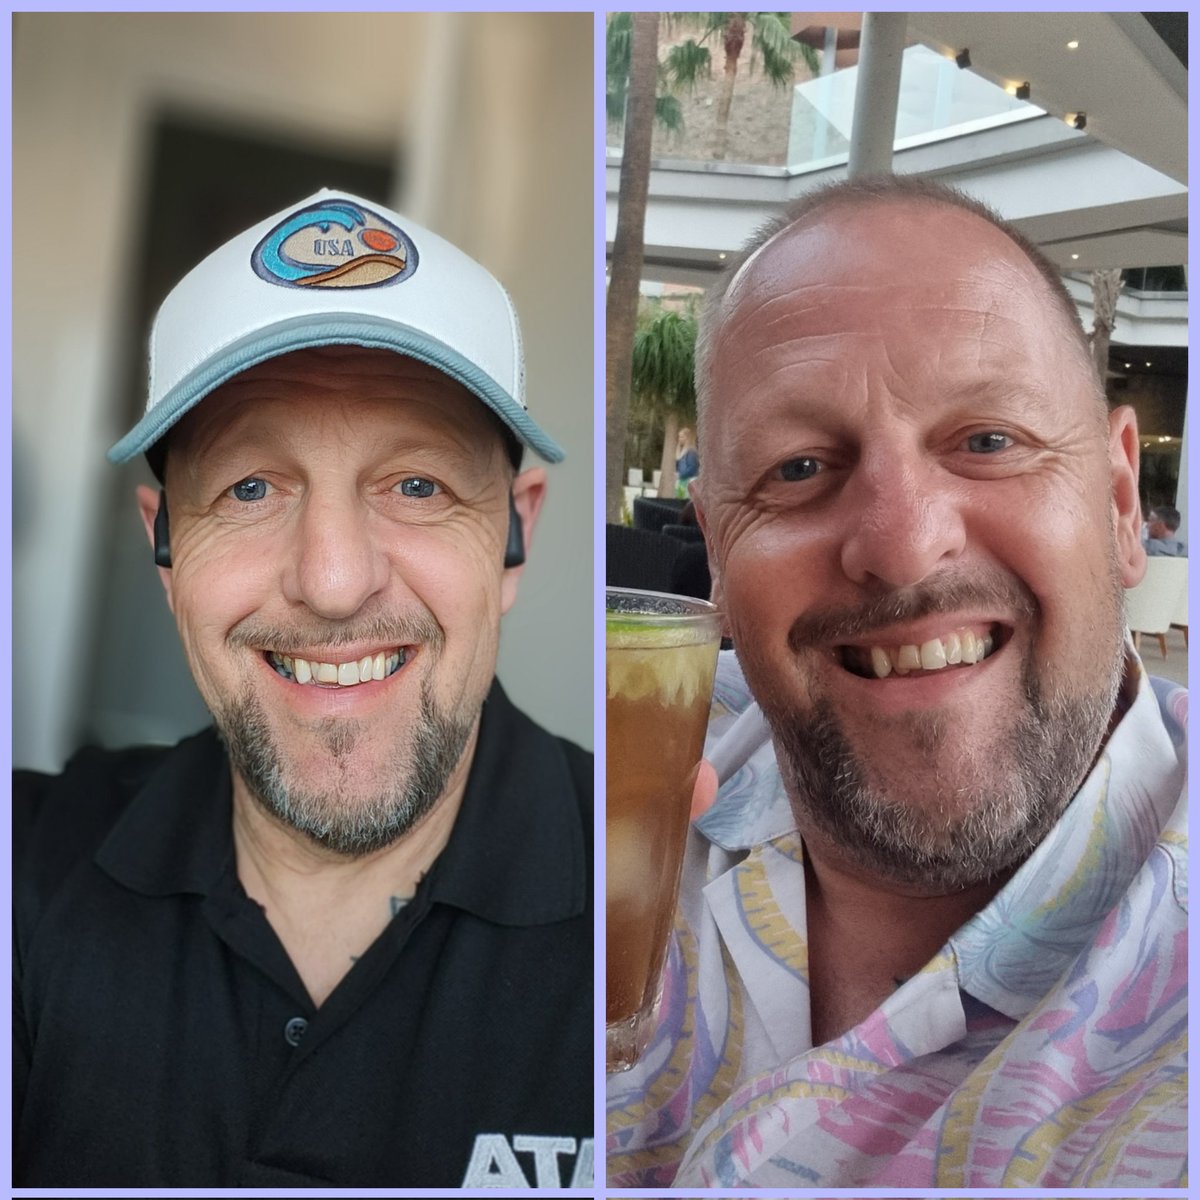 Weight loss Wednesday, July 2022, over indulgence of alcohol and food and lots of fake smiles, to yesterday, tired and exhausted from over indulgence of exercise and work, but 4st lighter, fitter, healthier and the smiles are real @SlimmingWorld #ifnothingchangesnothingchanges